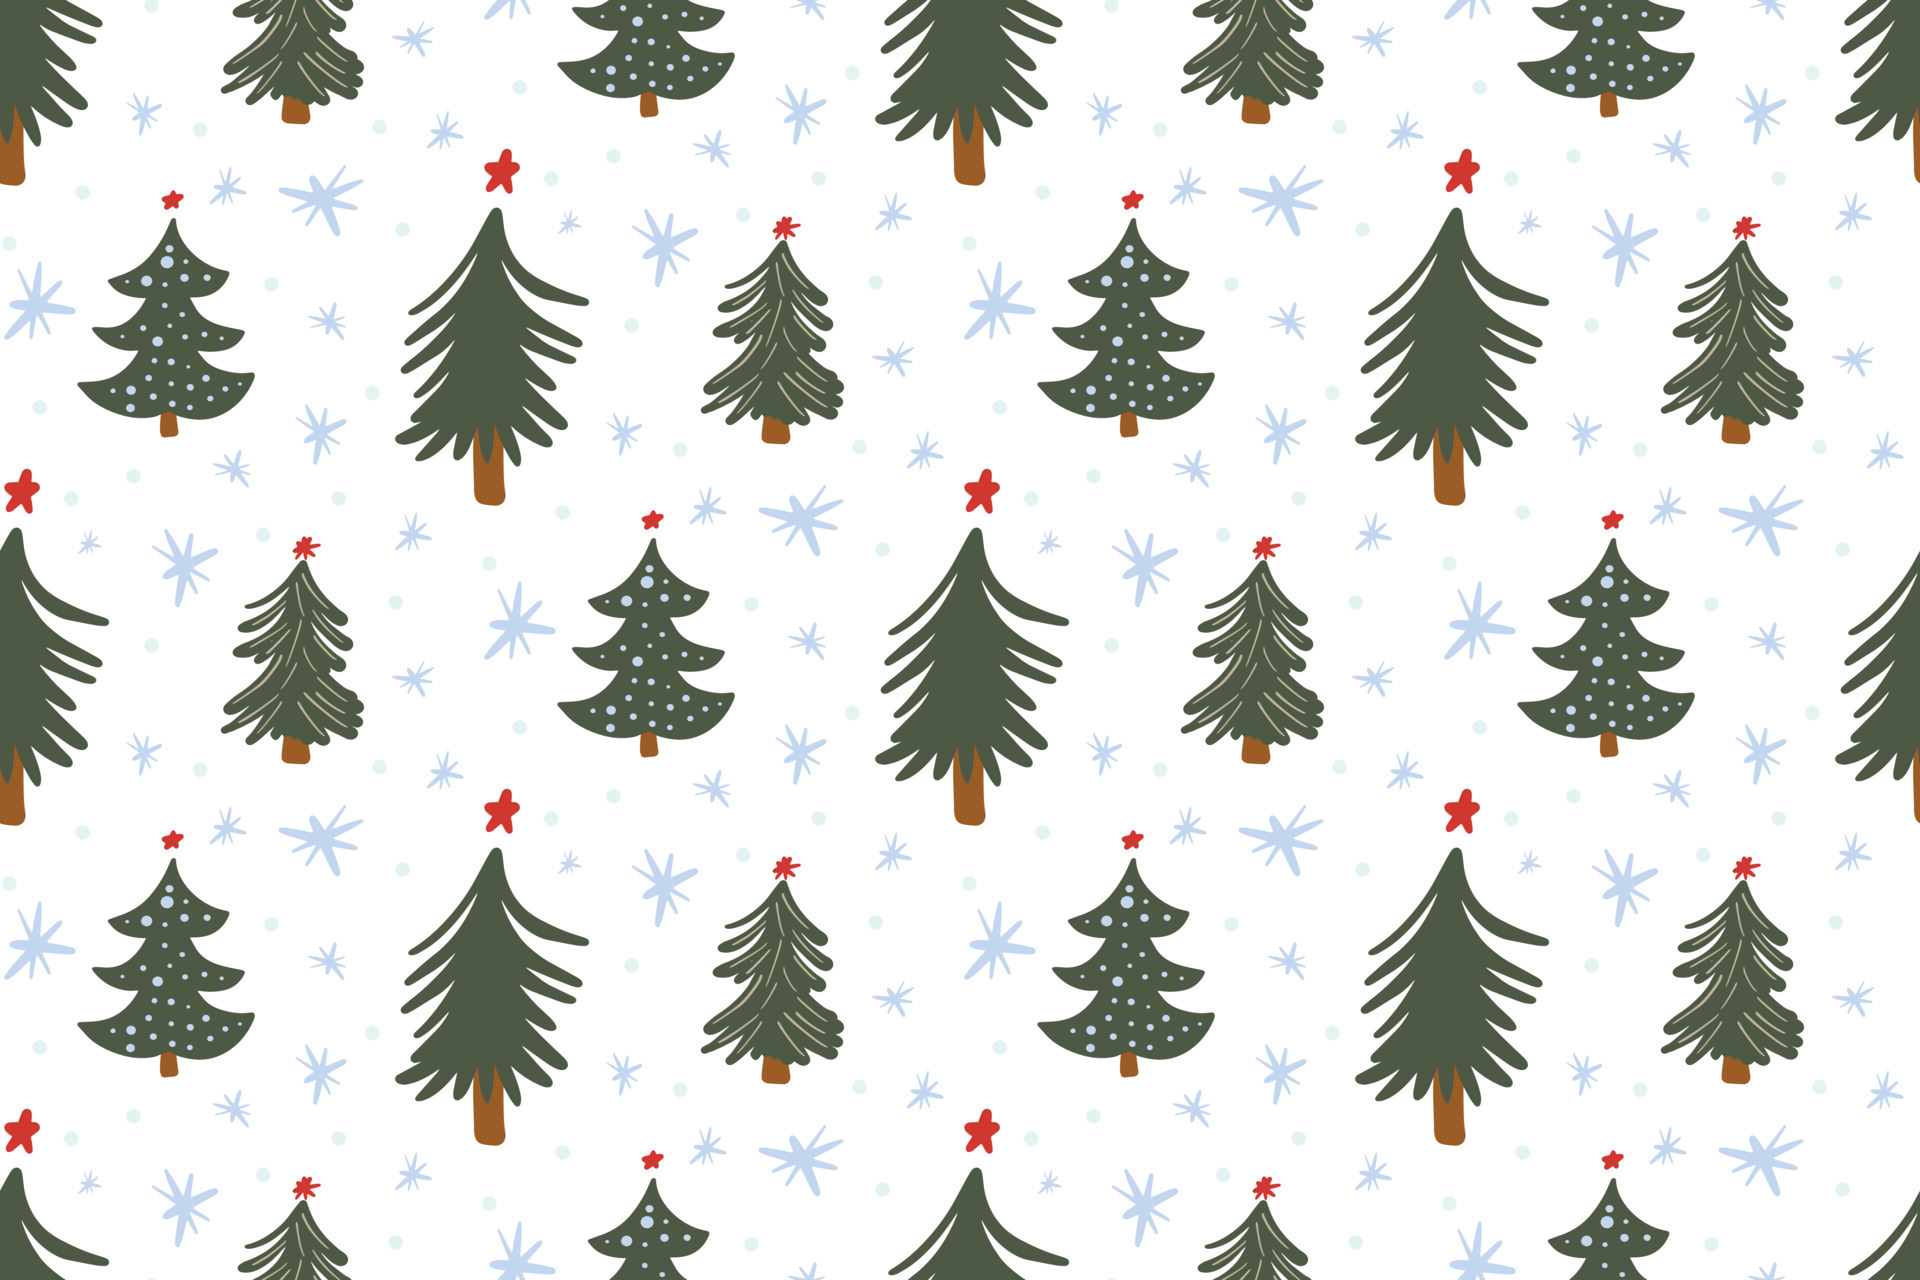 Cute winter seamless pattern background with Christmas tree simple doodles and snowflakes in childish hand drawn style. Seasonal New Year holiday festive backdrop texture, print